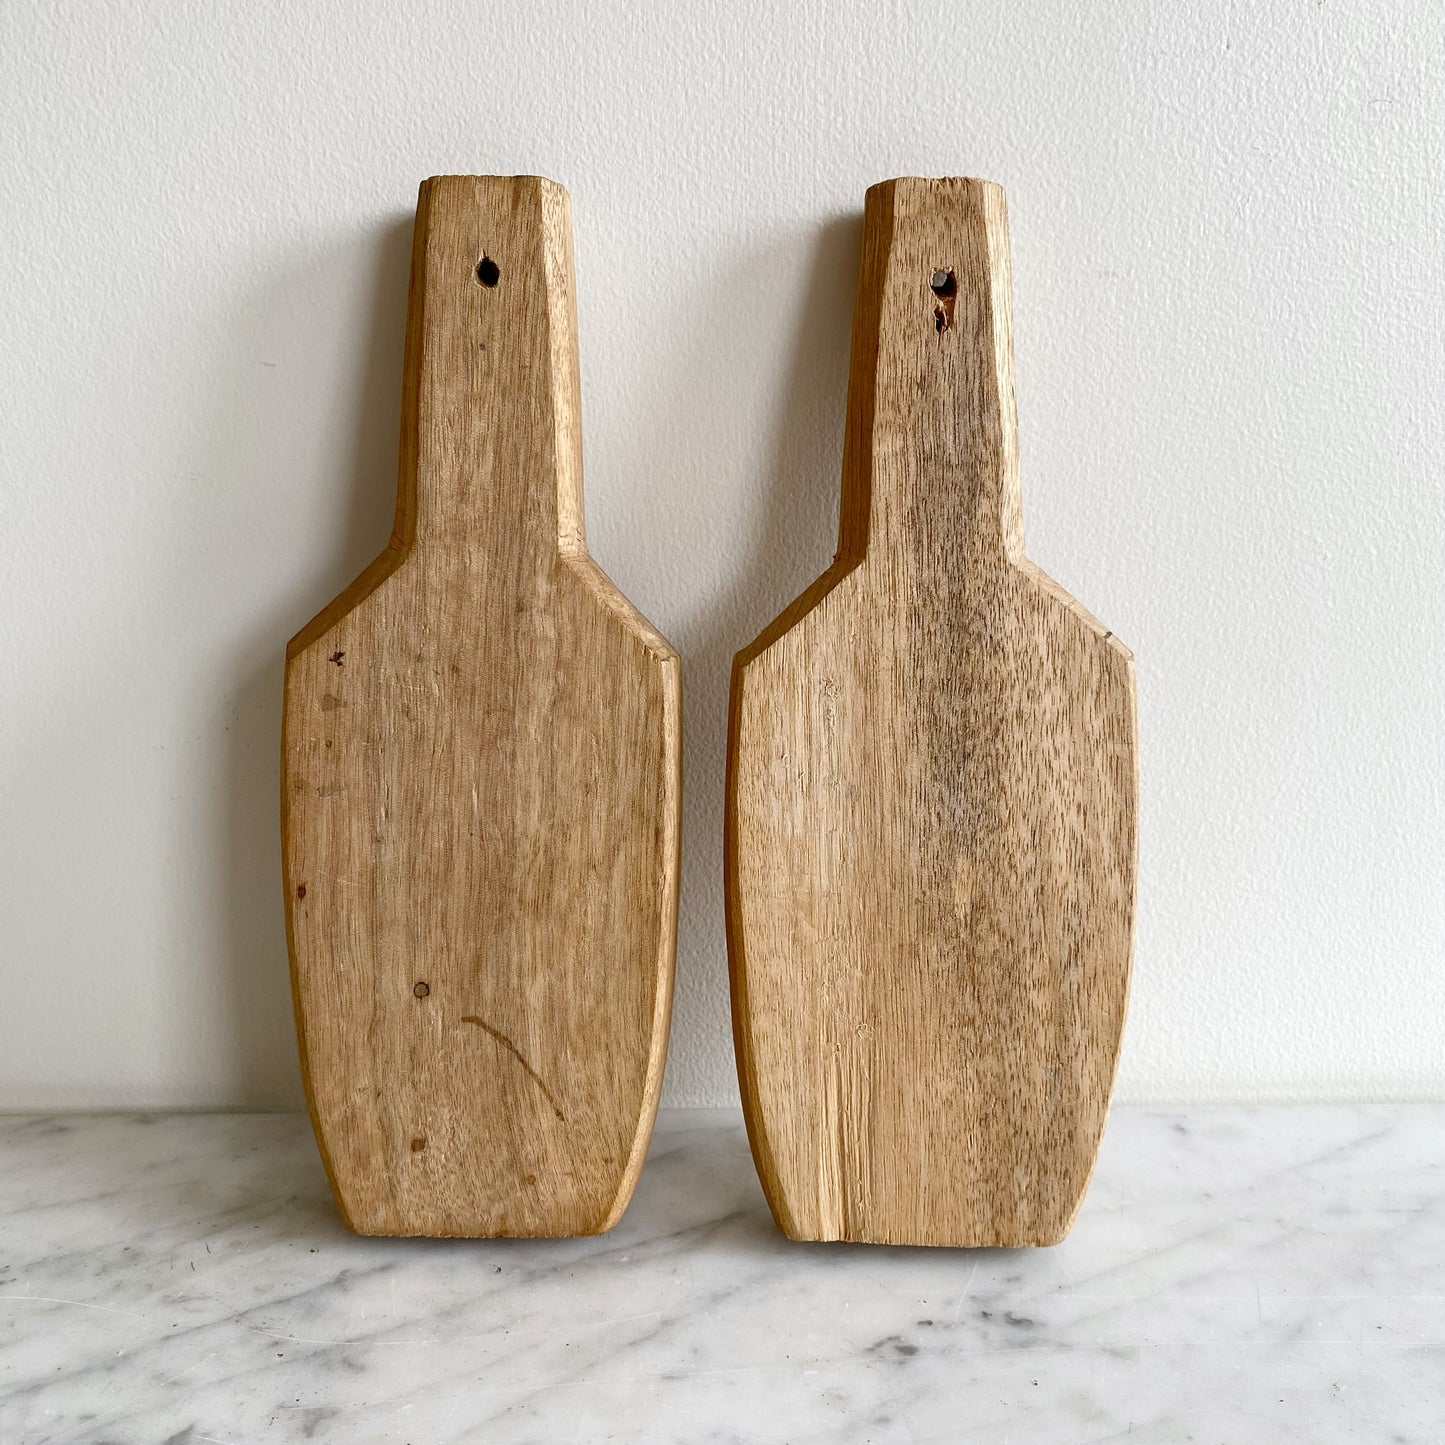 Pair of Carved Wooden Cookie Molds / Presses